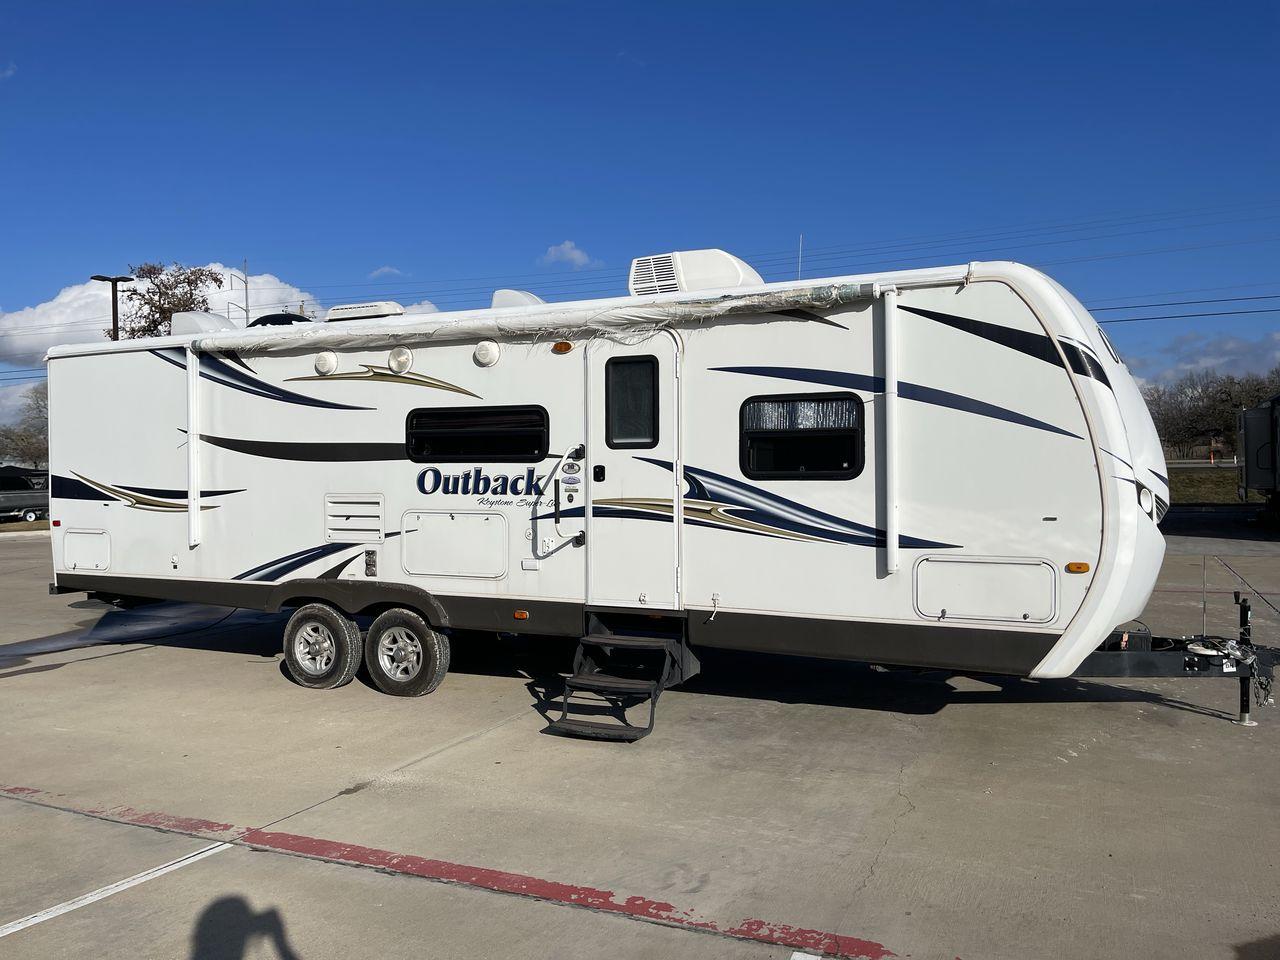 2012 WHITE KEYSTONE OUTBACK 292BH (4YDT29225CB) , Length: 32.75 | Dry Weight: 6,559 lbs. | Gross Weight: 8,200 lbs. | Slides: 1 transmission, located at 4319 N Main St, Cleburne, TX, 76033, (817) 678-5133, 32.385960, -97.391212 - The 2012 Keystone Outback 292BH is a versatile and well-equipped travel trailer perfect for enjoyable family adventures. This model offers a great balance between spaciousness and towability, with a length of 32.75 feet and a dry weight of 6,559 pounds. With a single slide, the Outback 292BH provide - Photo #24